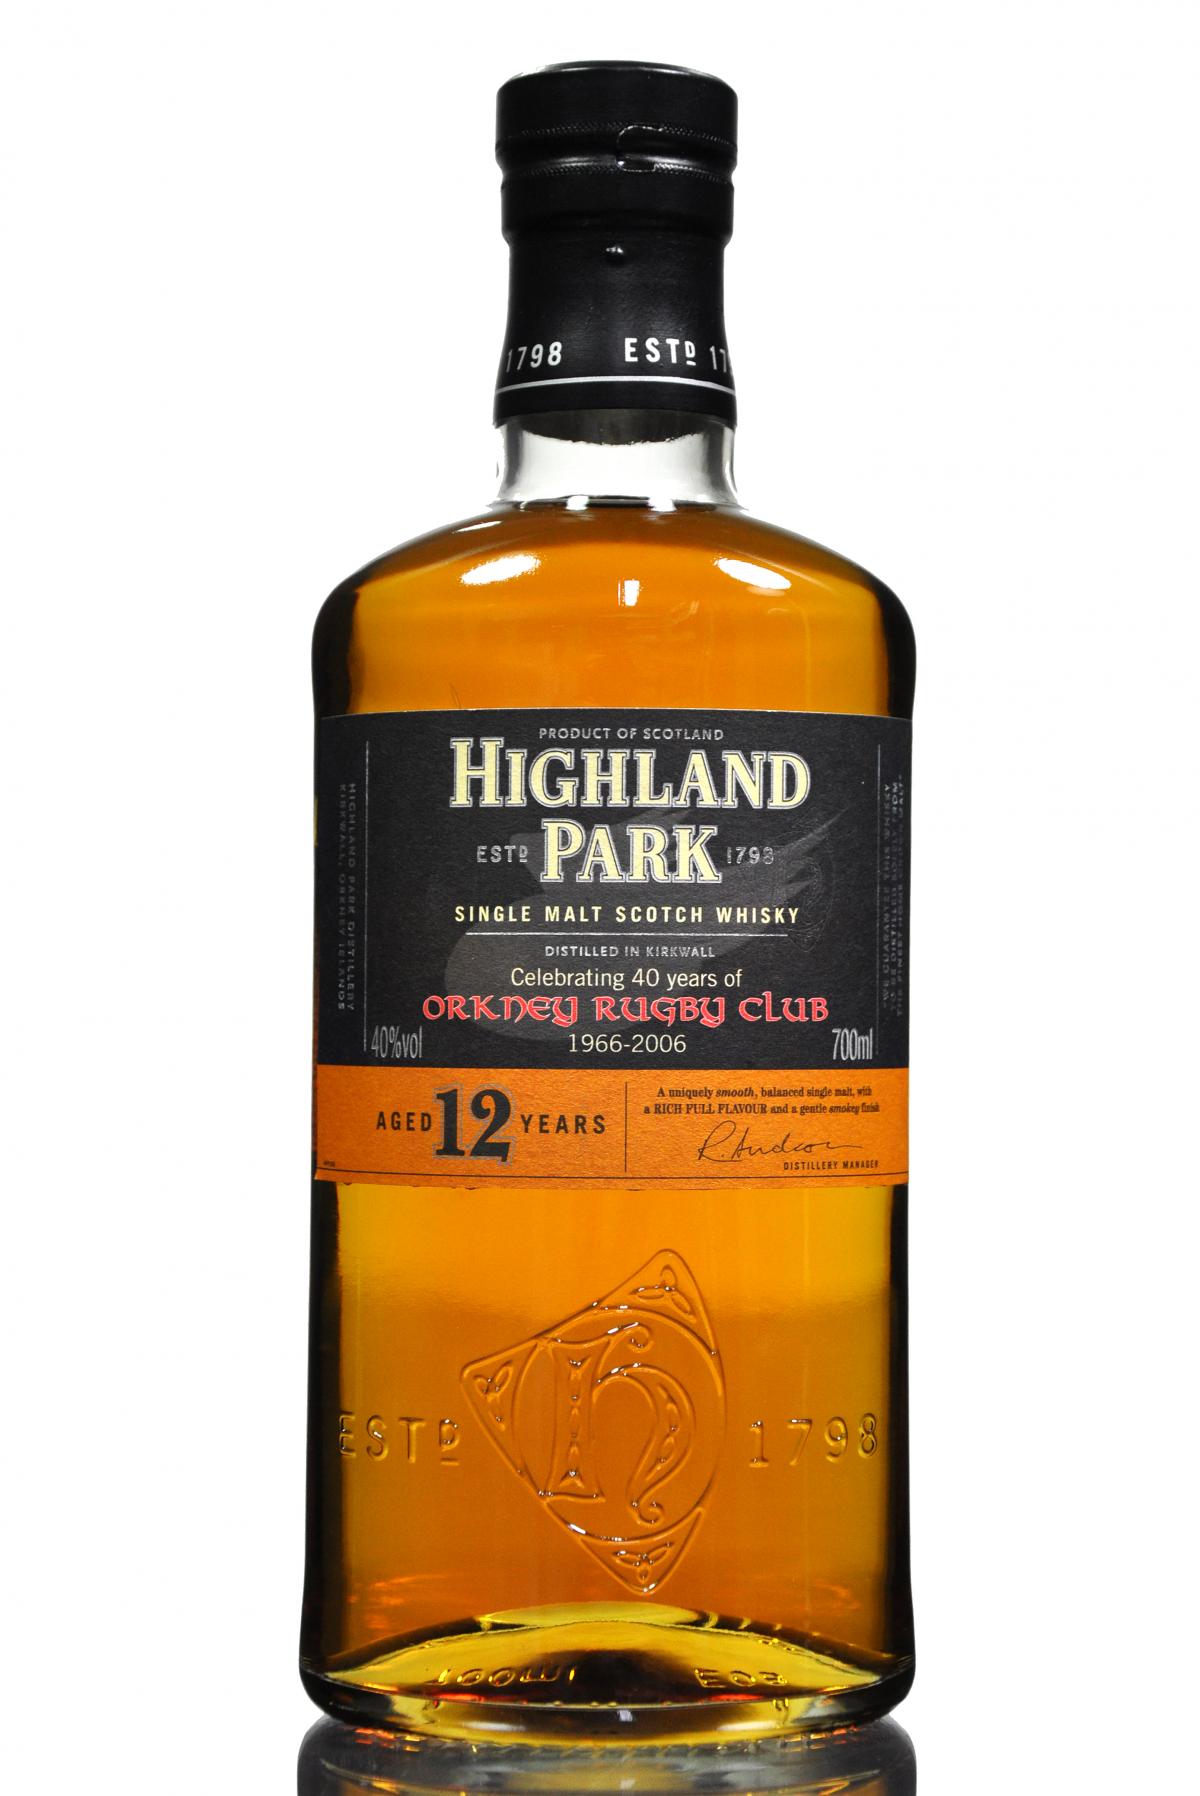 Highland Park 12 Year Old - Celebrating 40 years od Orkney Rugby Club 1966-2006